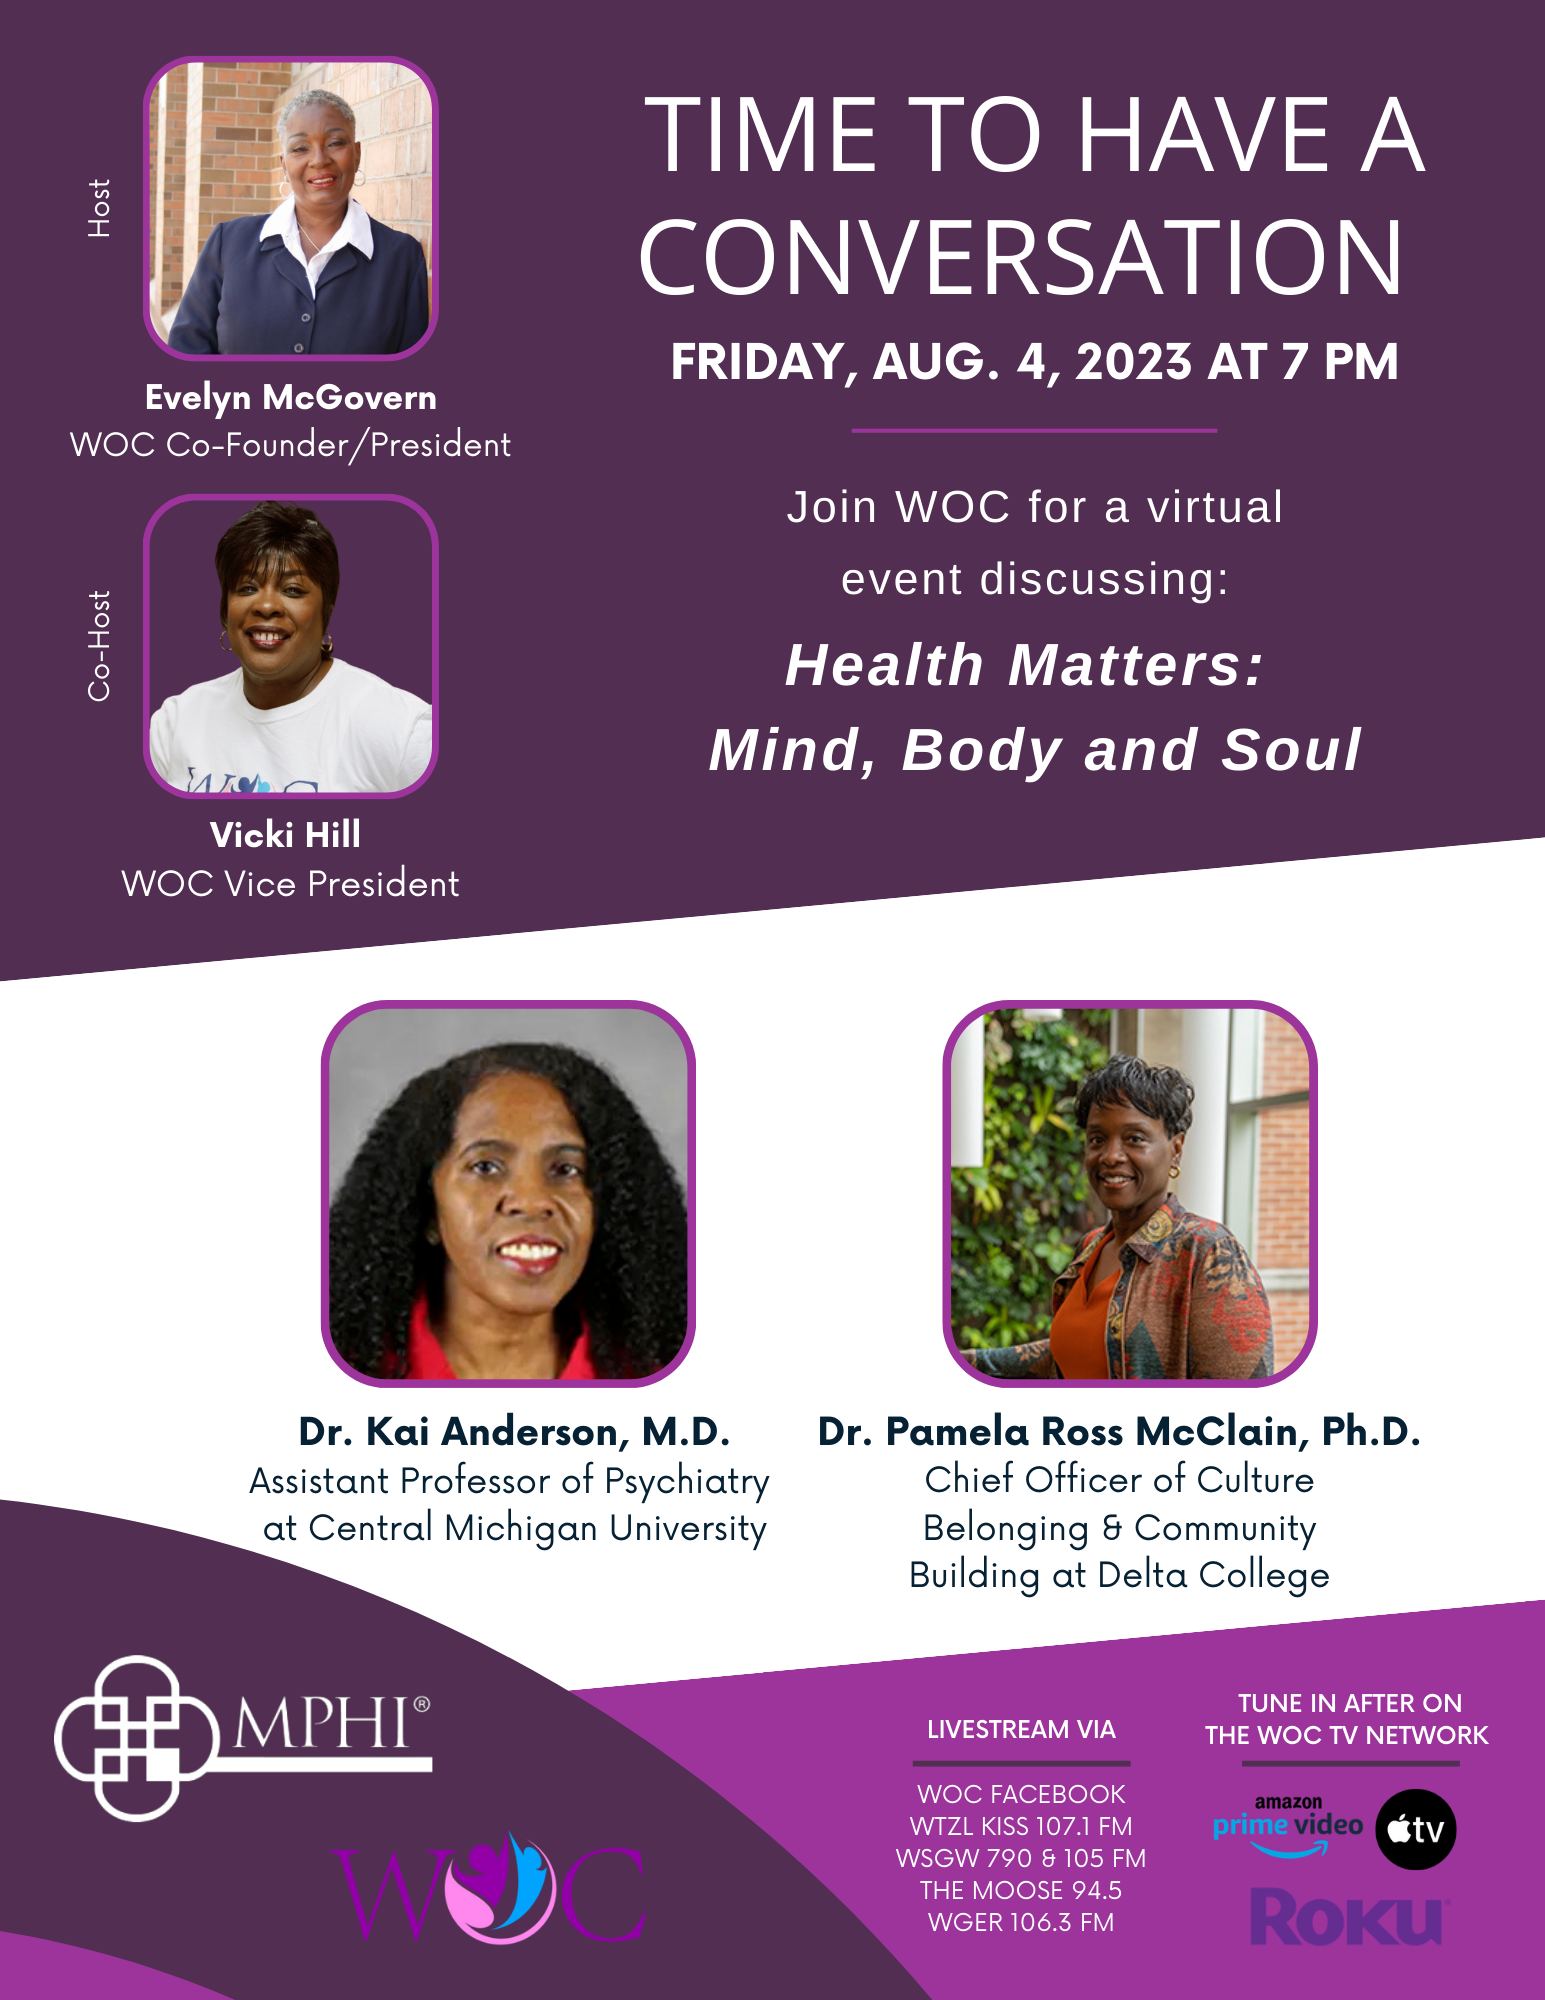 <h1 class="tribe-events-single-event-title">WOC presents TIME TO HAVE A CONVERSATION</h1>